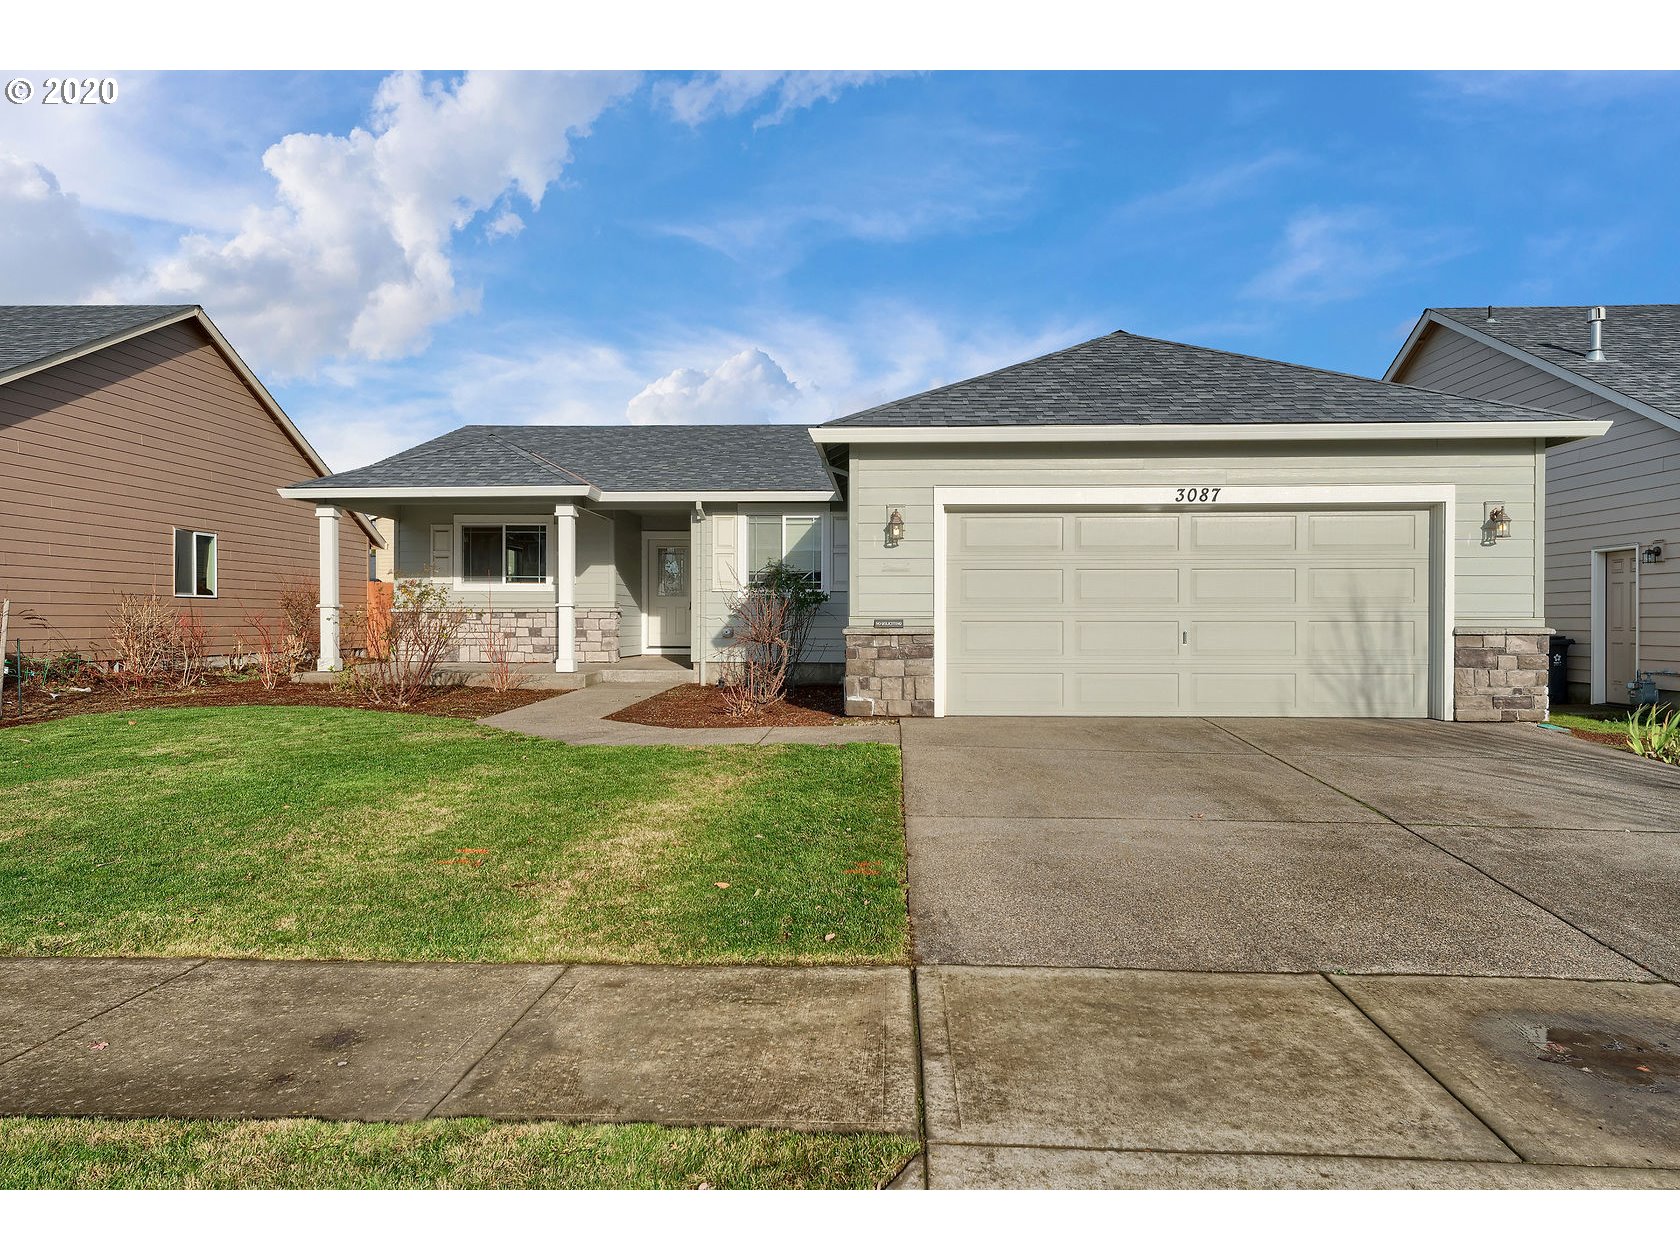 3087 REED AVE (1 of 32)